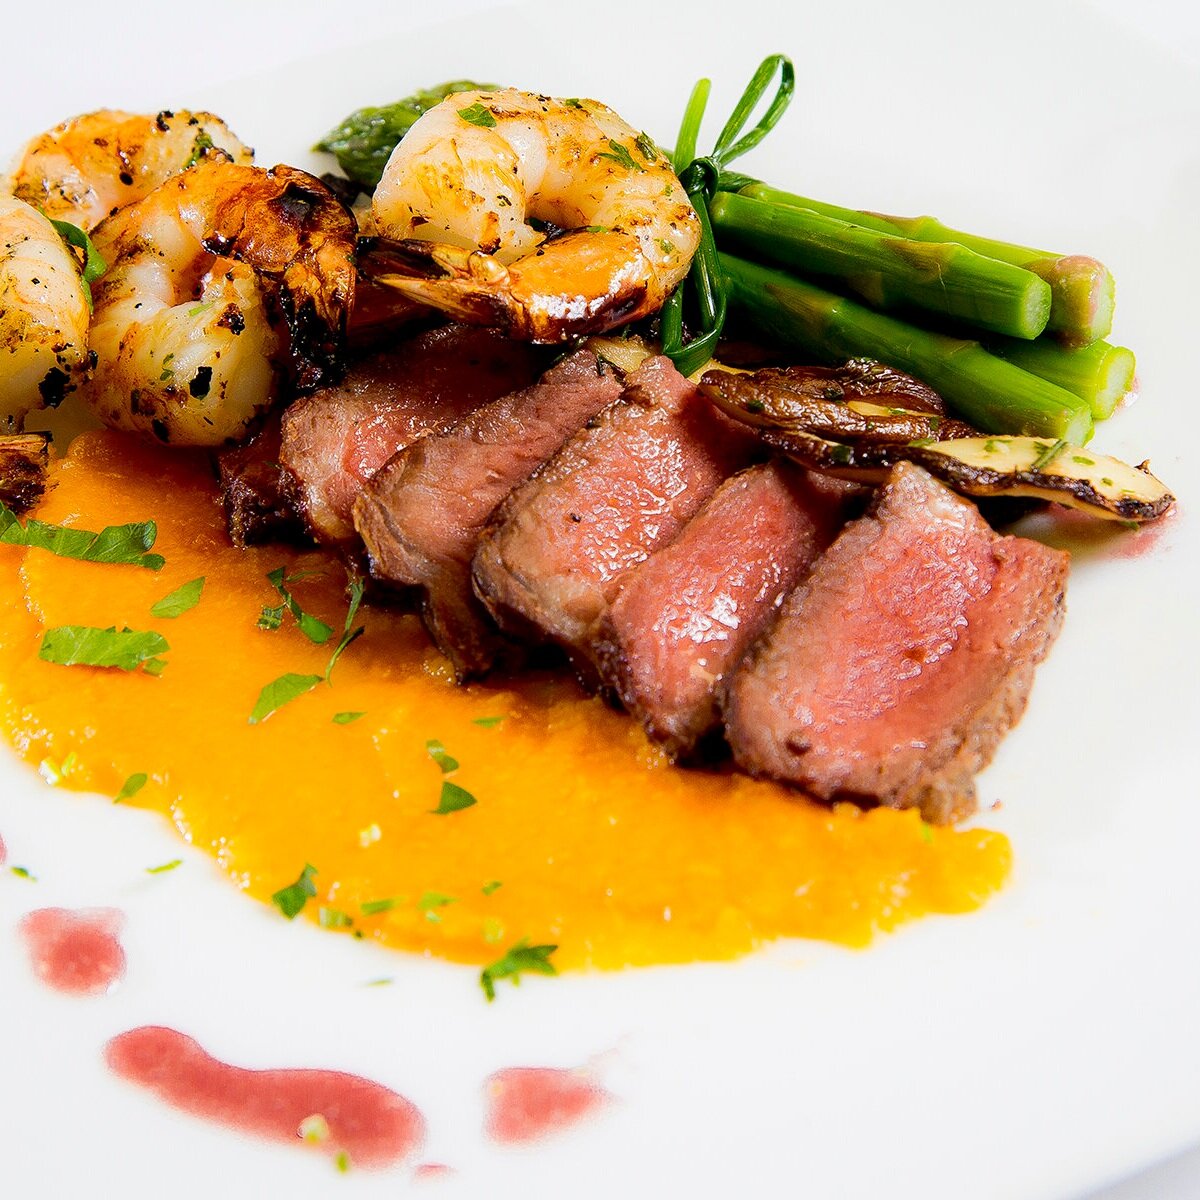 Surf and Turf Plated Entree for virginia beach wedding catering